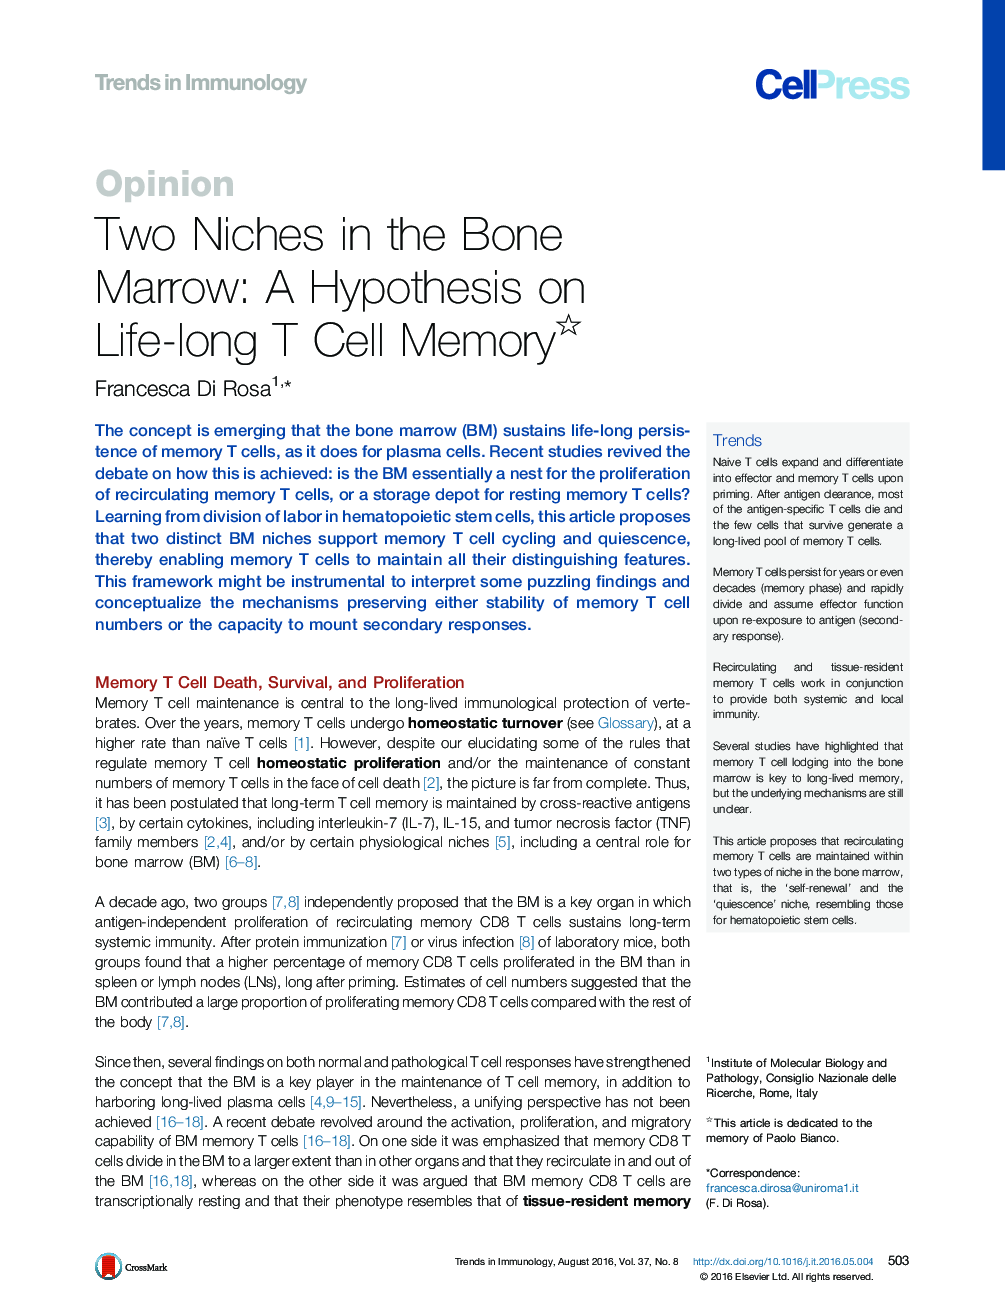 Two Niches in the Bone Marrow: A Hypothesis on Life-long T Cell Memory 